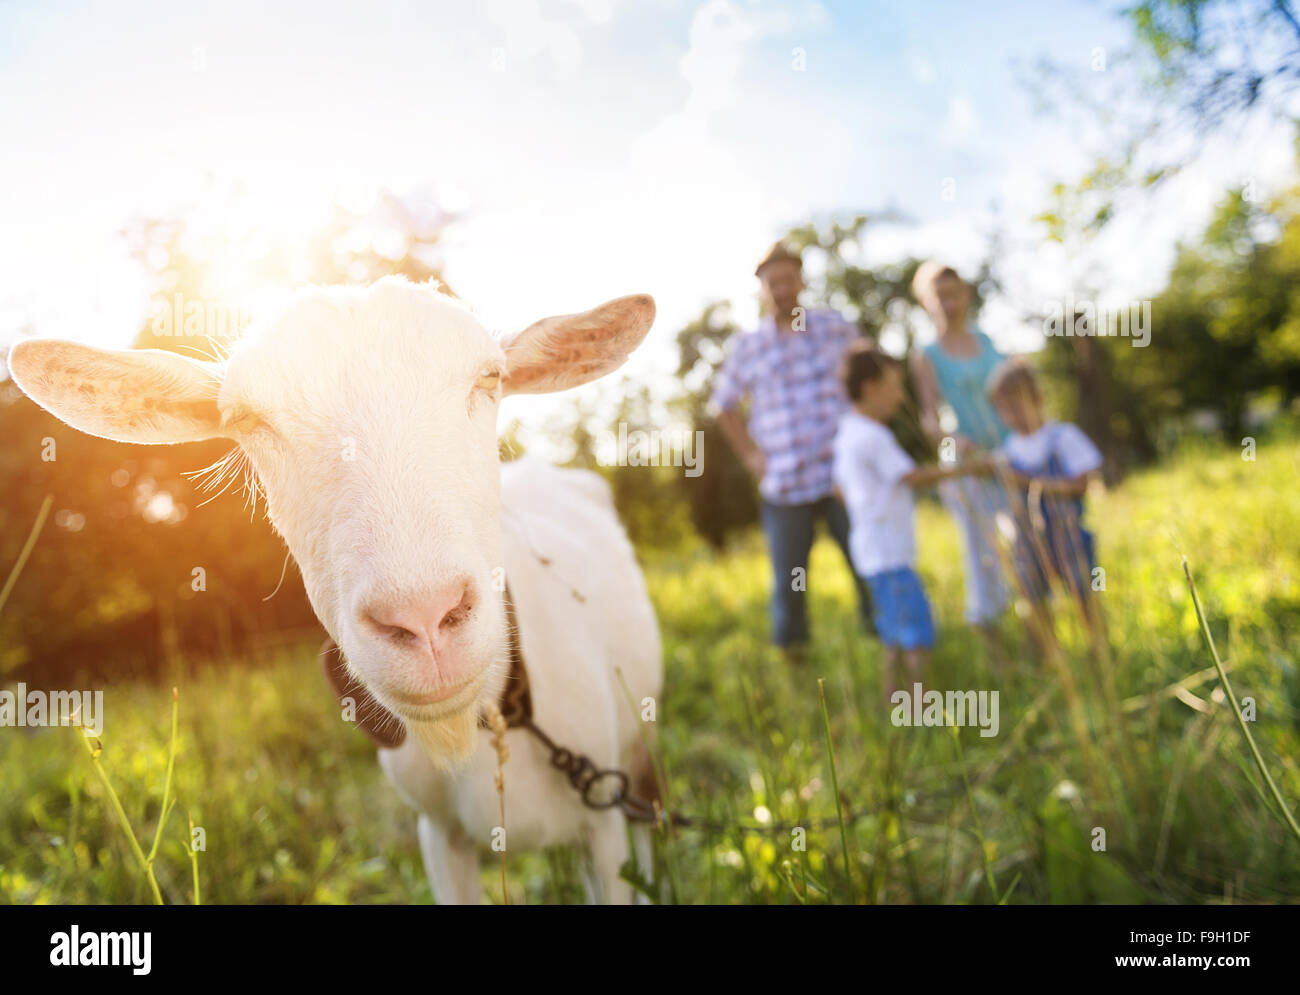 Happy young family spending time together outside in green nature with a goat. Stock Photo